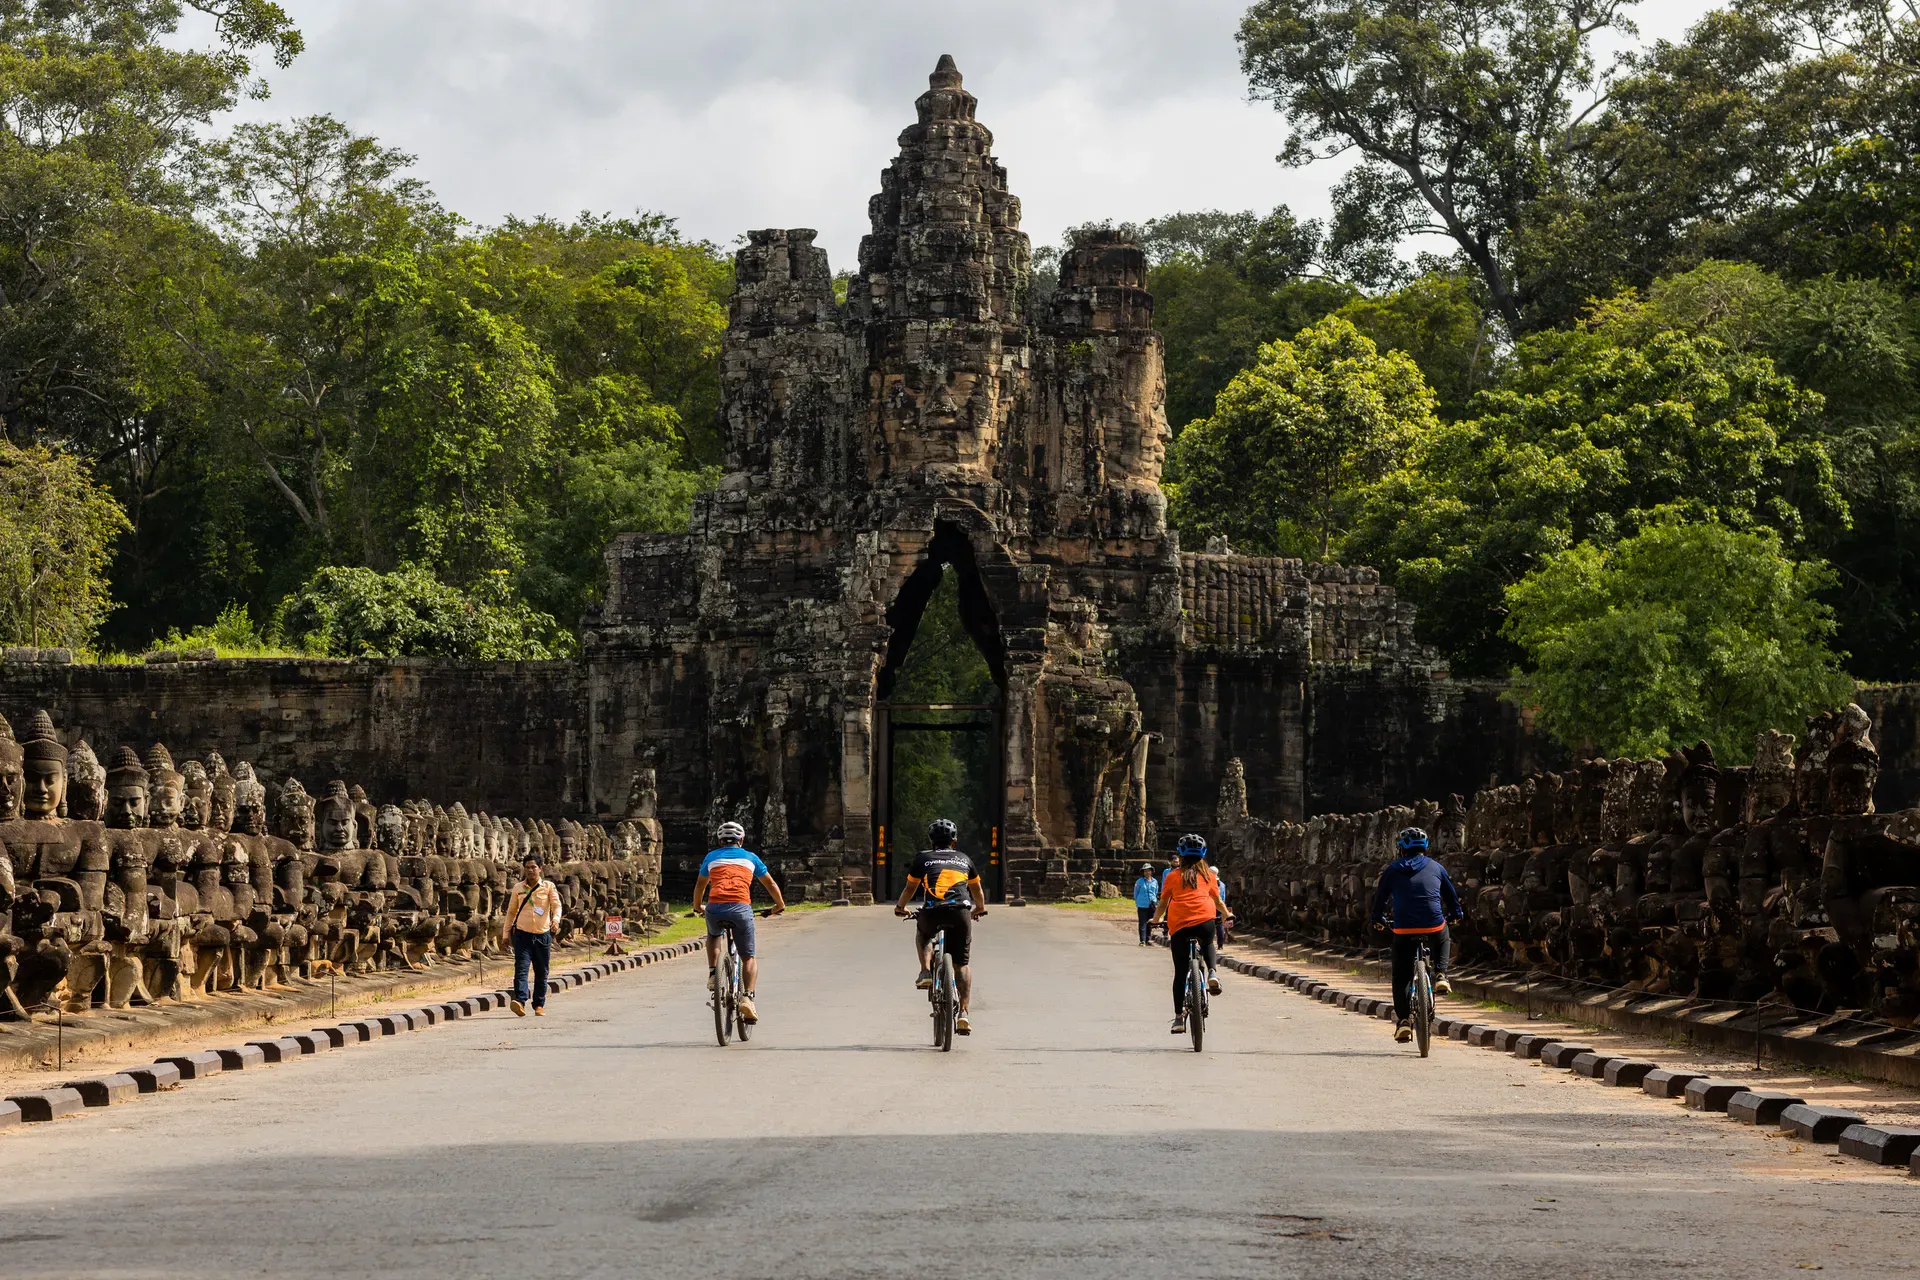  Four cyclists riding towards the entrance of the Bayon, Angkor Wat